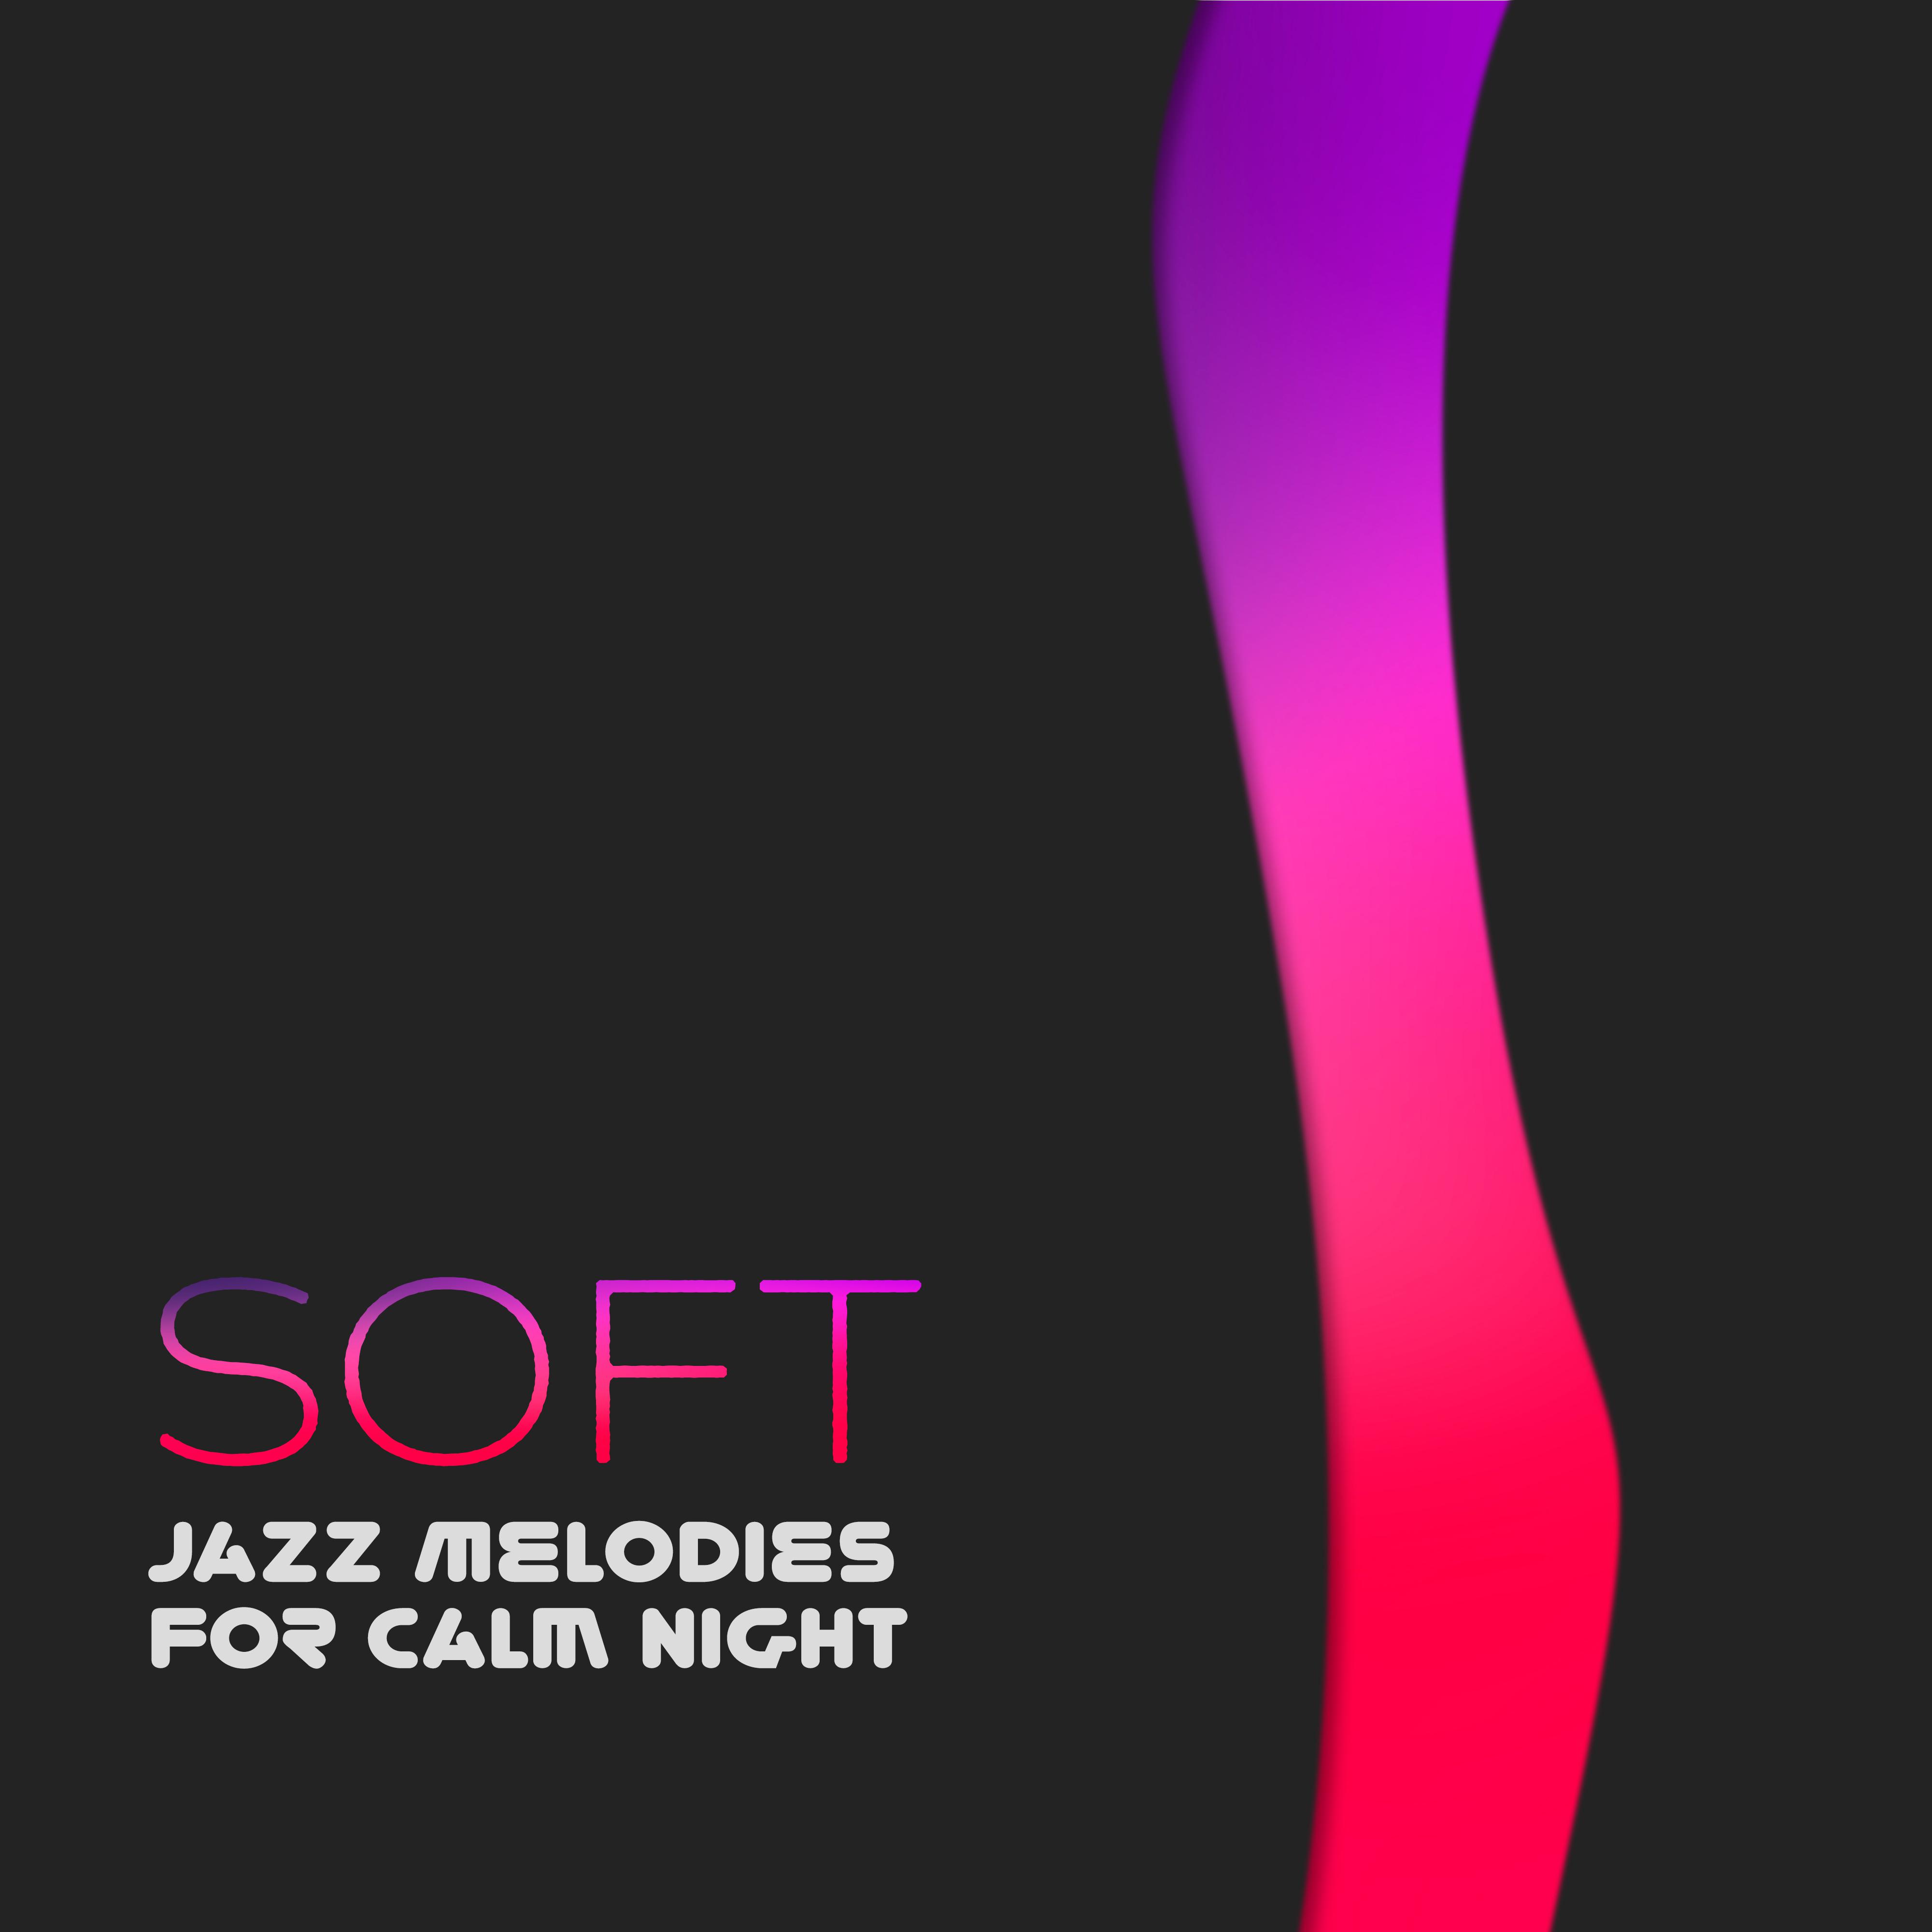 Soft Jazz Melodies for Calm Night